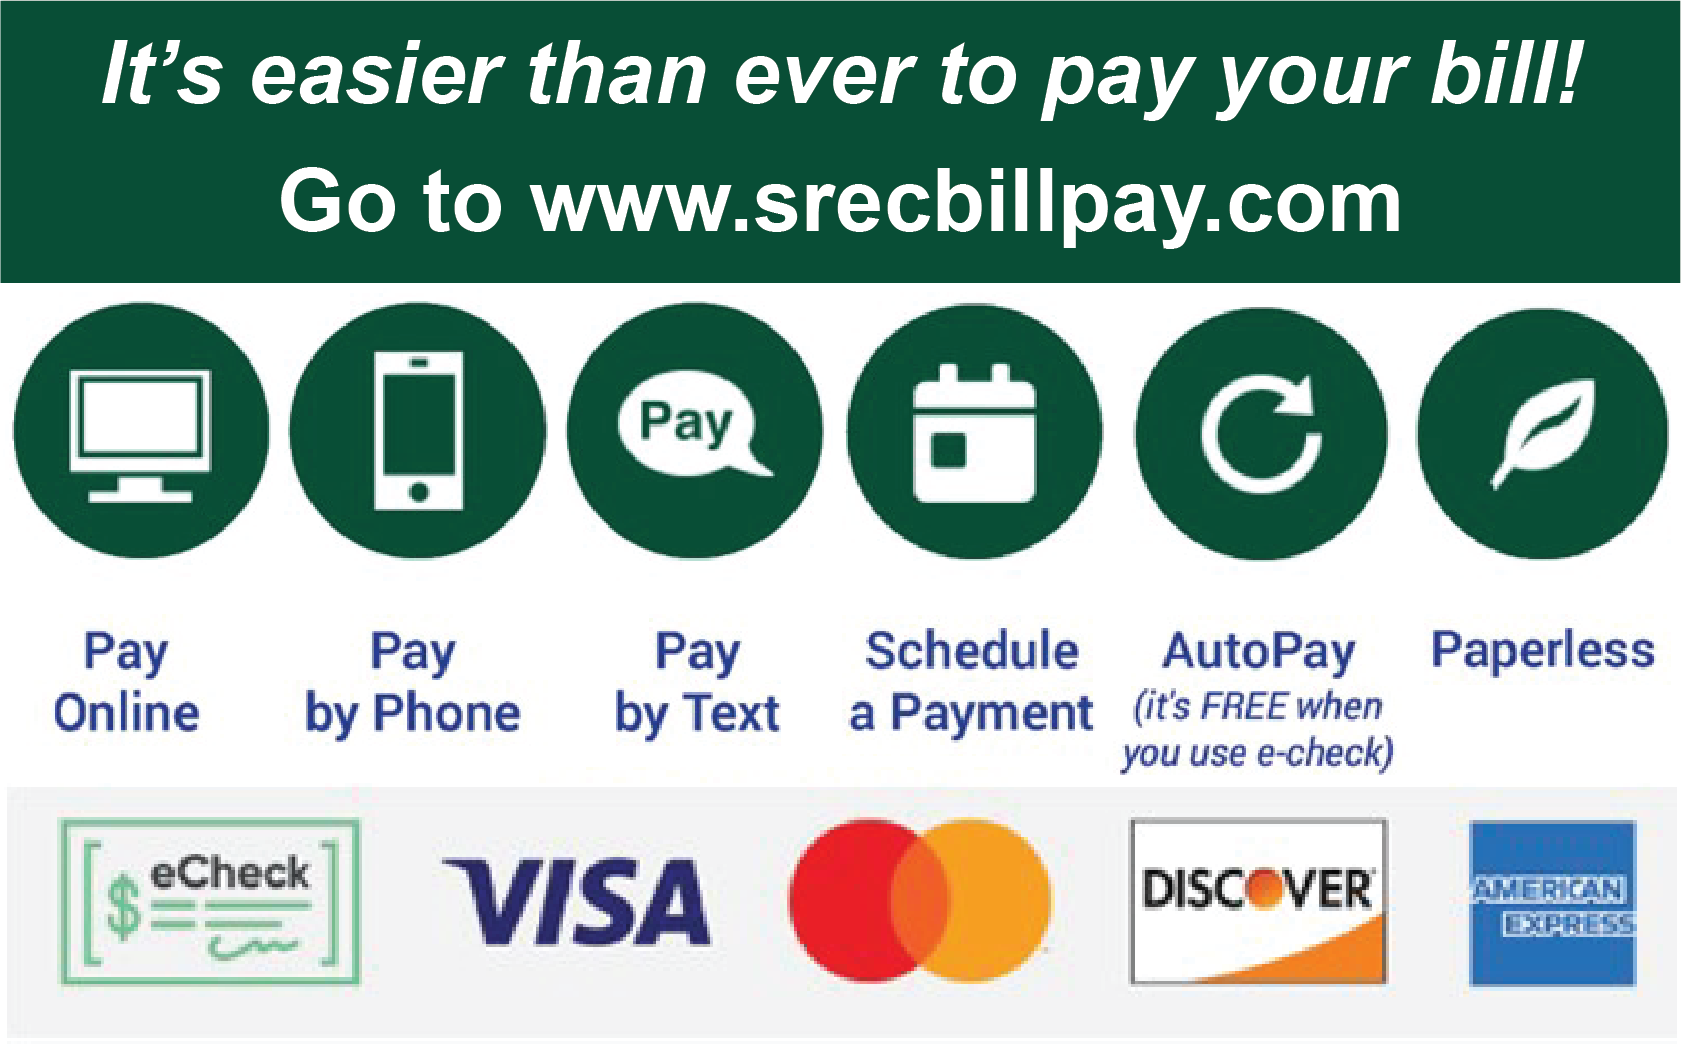 It's easier than ever to pay your bill! Go to www.srecbillpay.com. Pay Online, Pay by Phone, Pay by Text, Schedule a Payment, AutoPay (it's FREE when you use e-check), Paperless. We accept eCheck, Visa, Mastercard, Discover, American Express, and more!